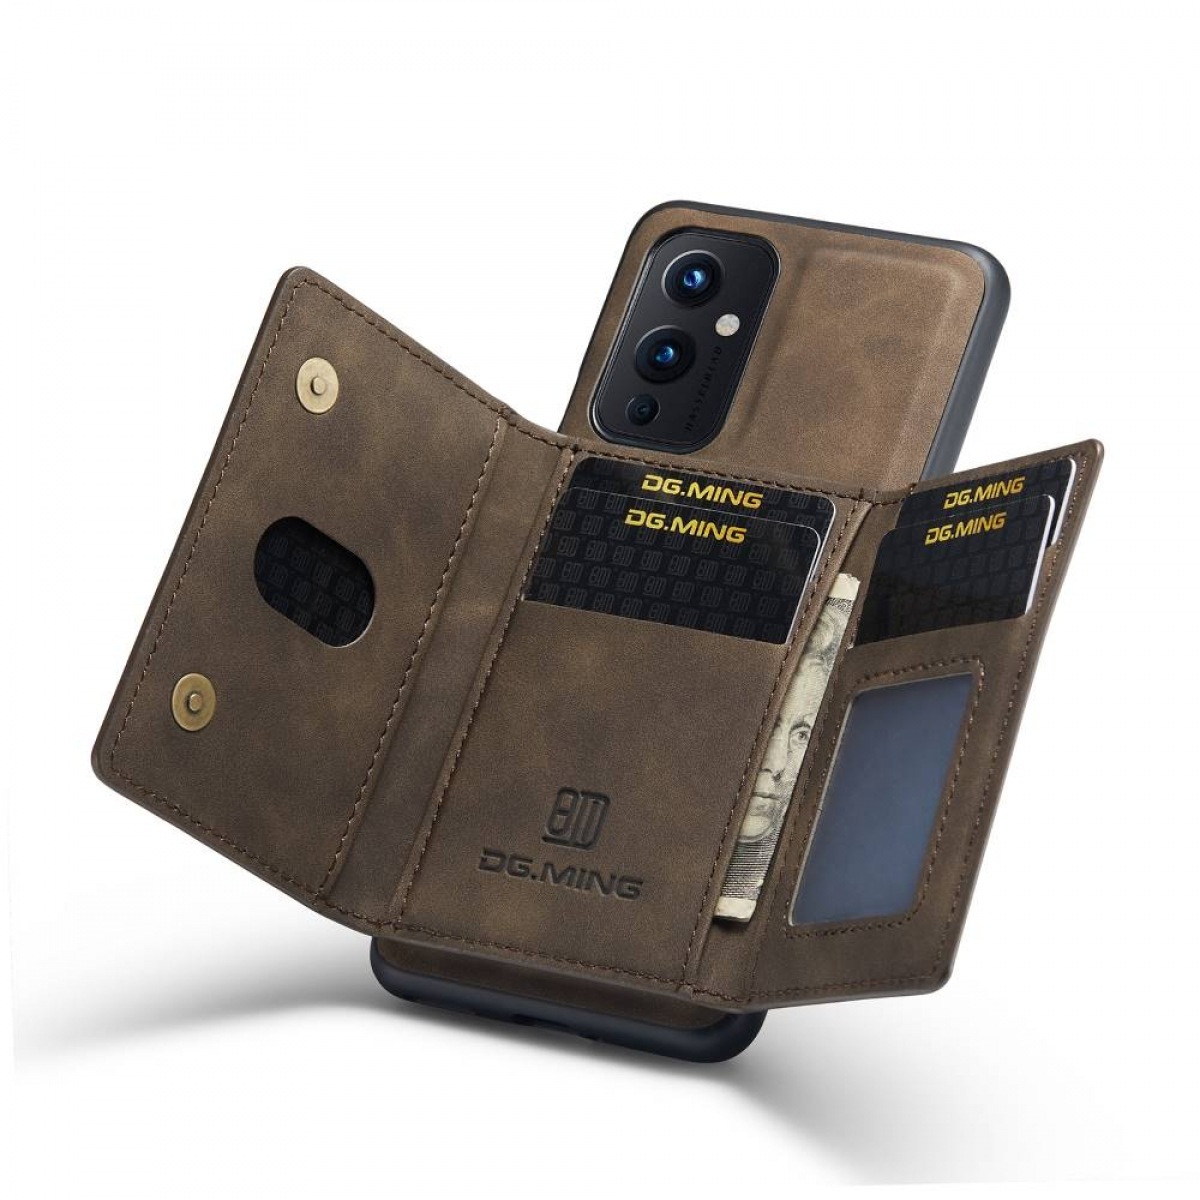 OnePlus, 2in1, Coffee Backcover, 9, DG M2 MING